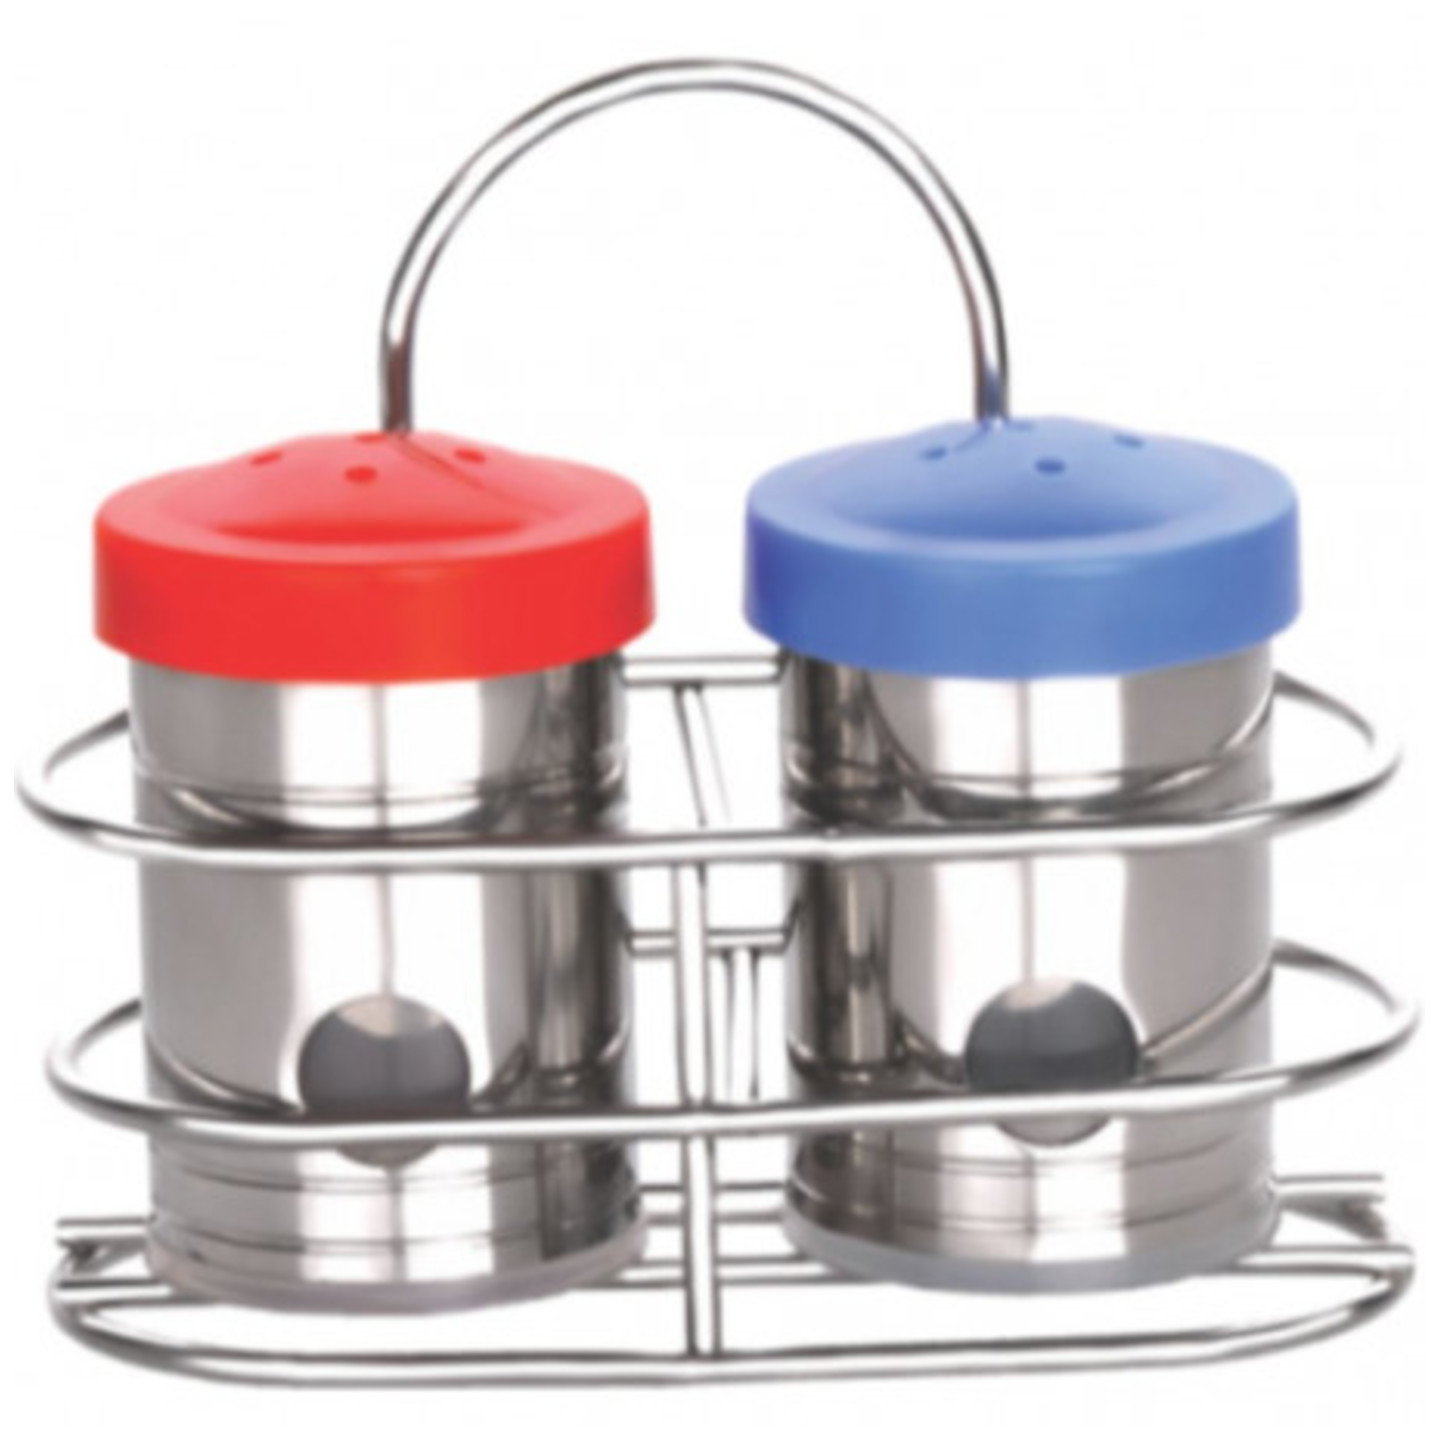 National Sale & Pepper Dispenser with Stand